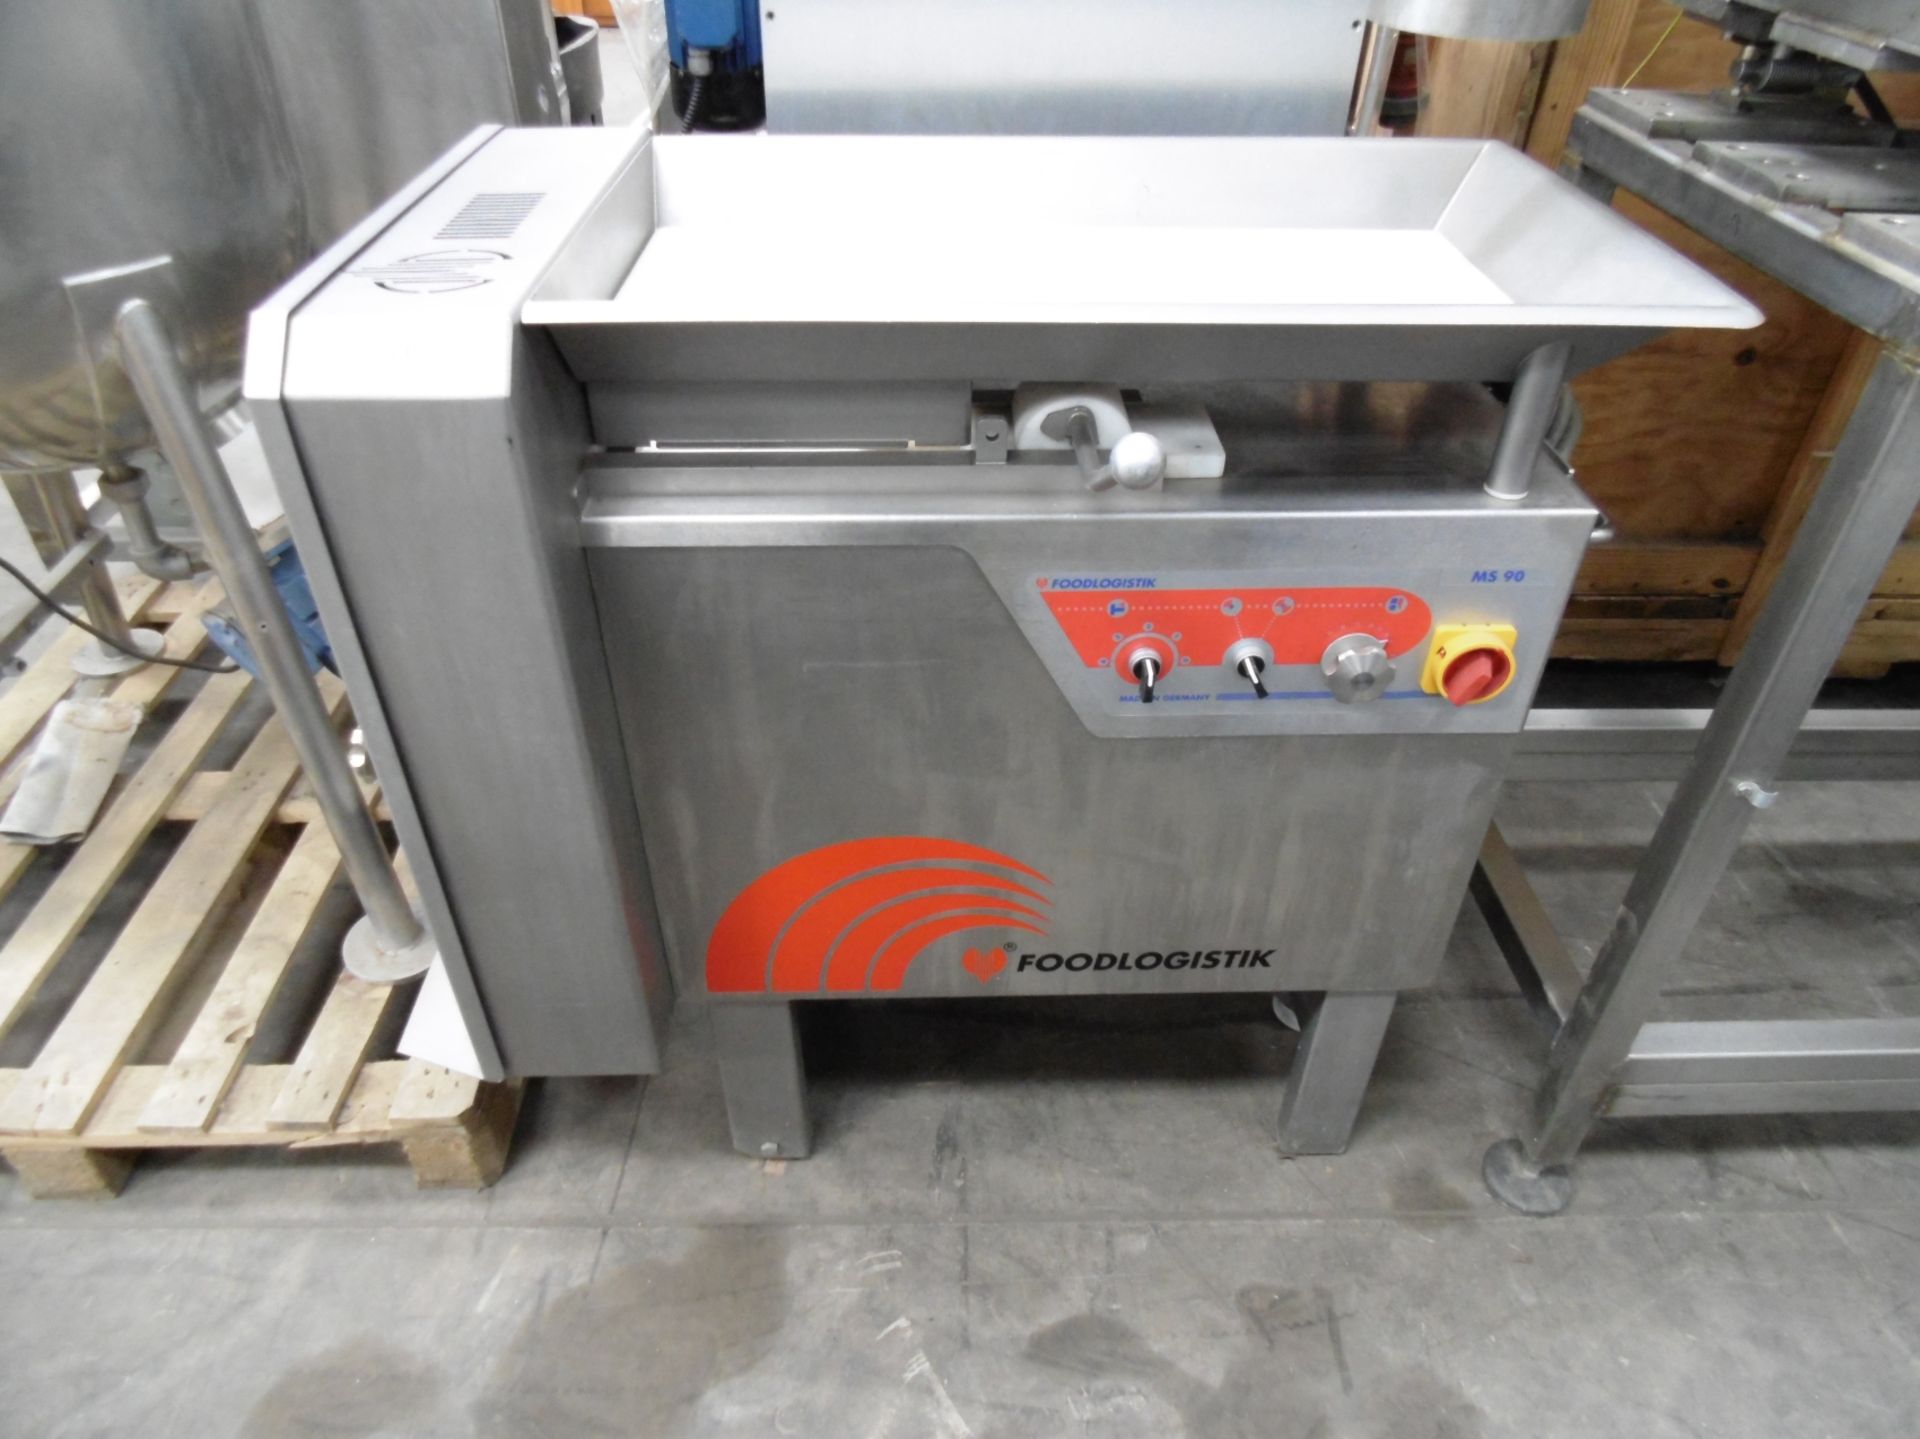 * A 2007 Food Logistik MS90 stainless steel food dicer. Please note there is a £5 + VAT Lift Out Fee